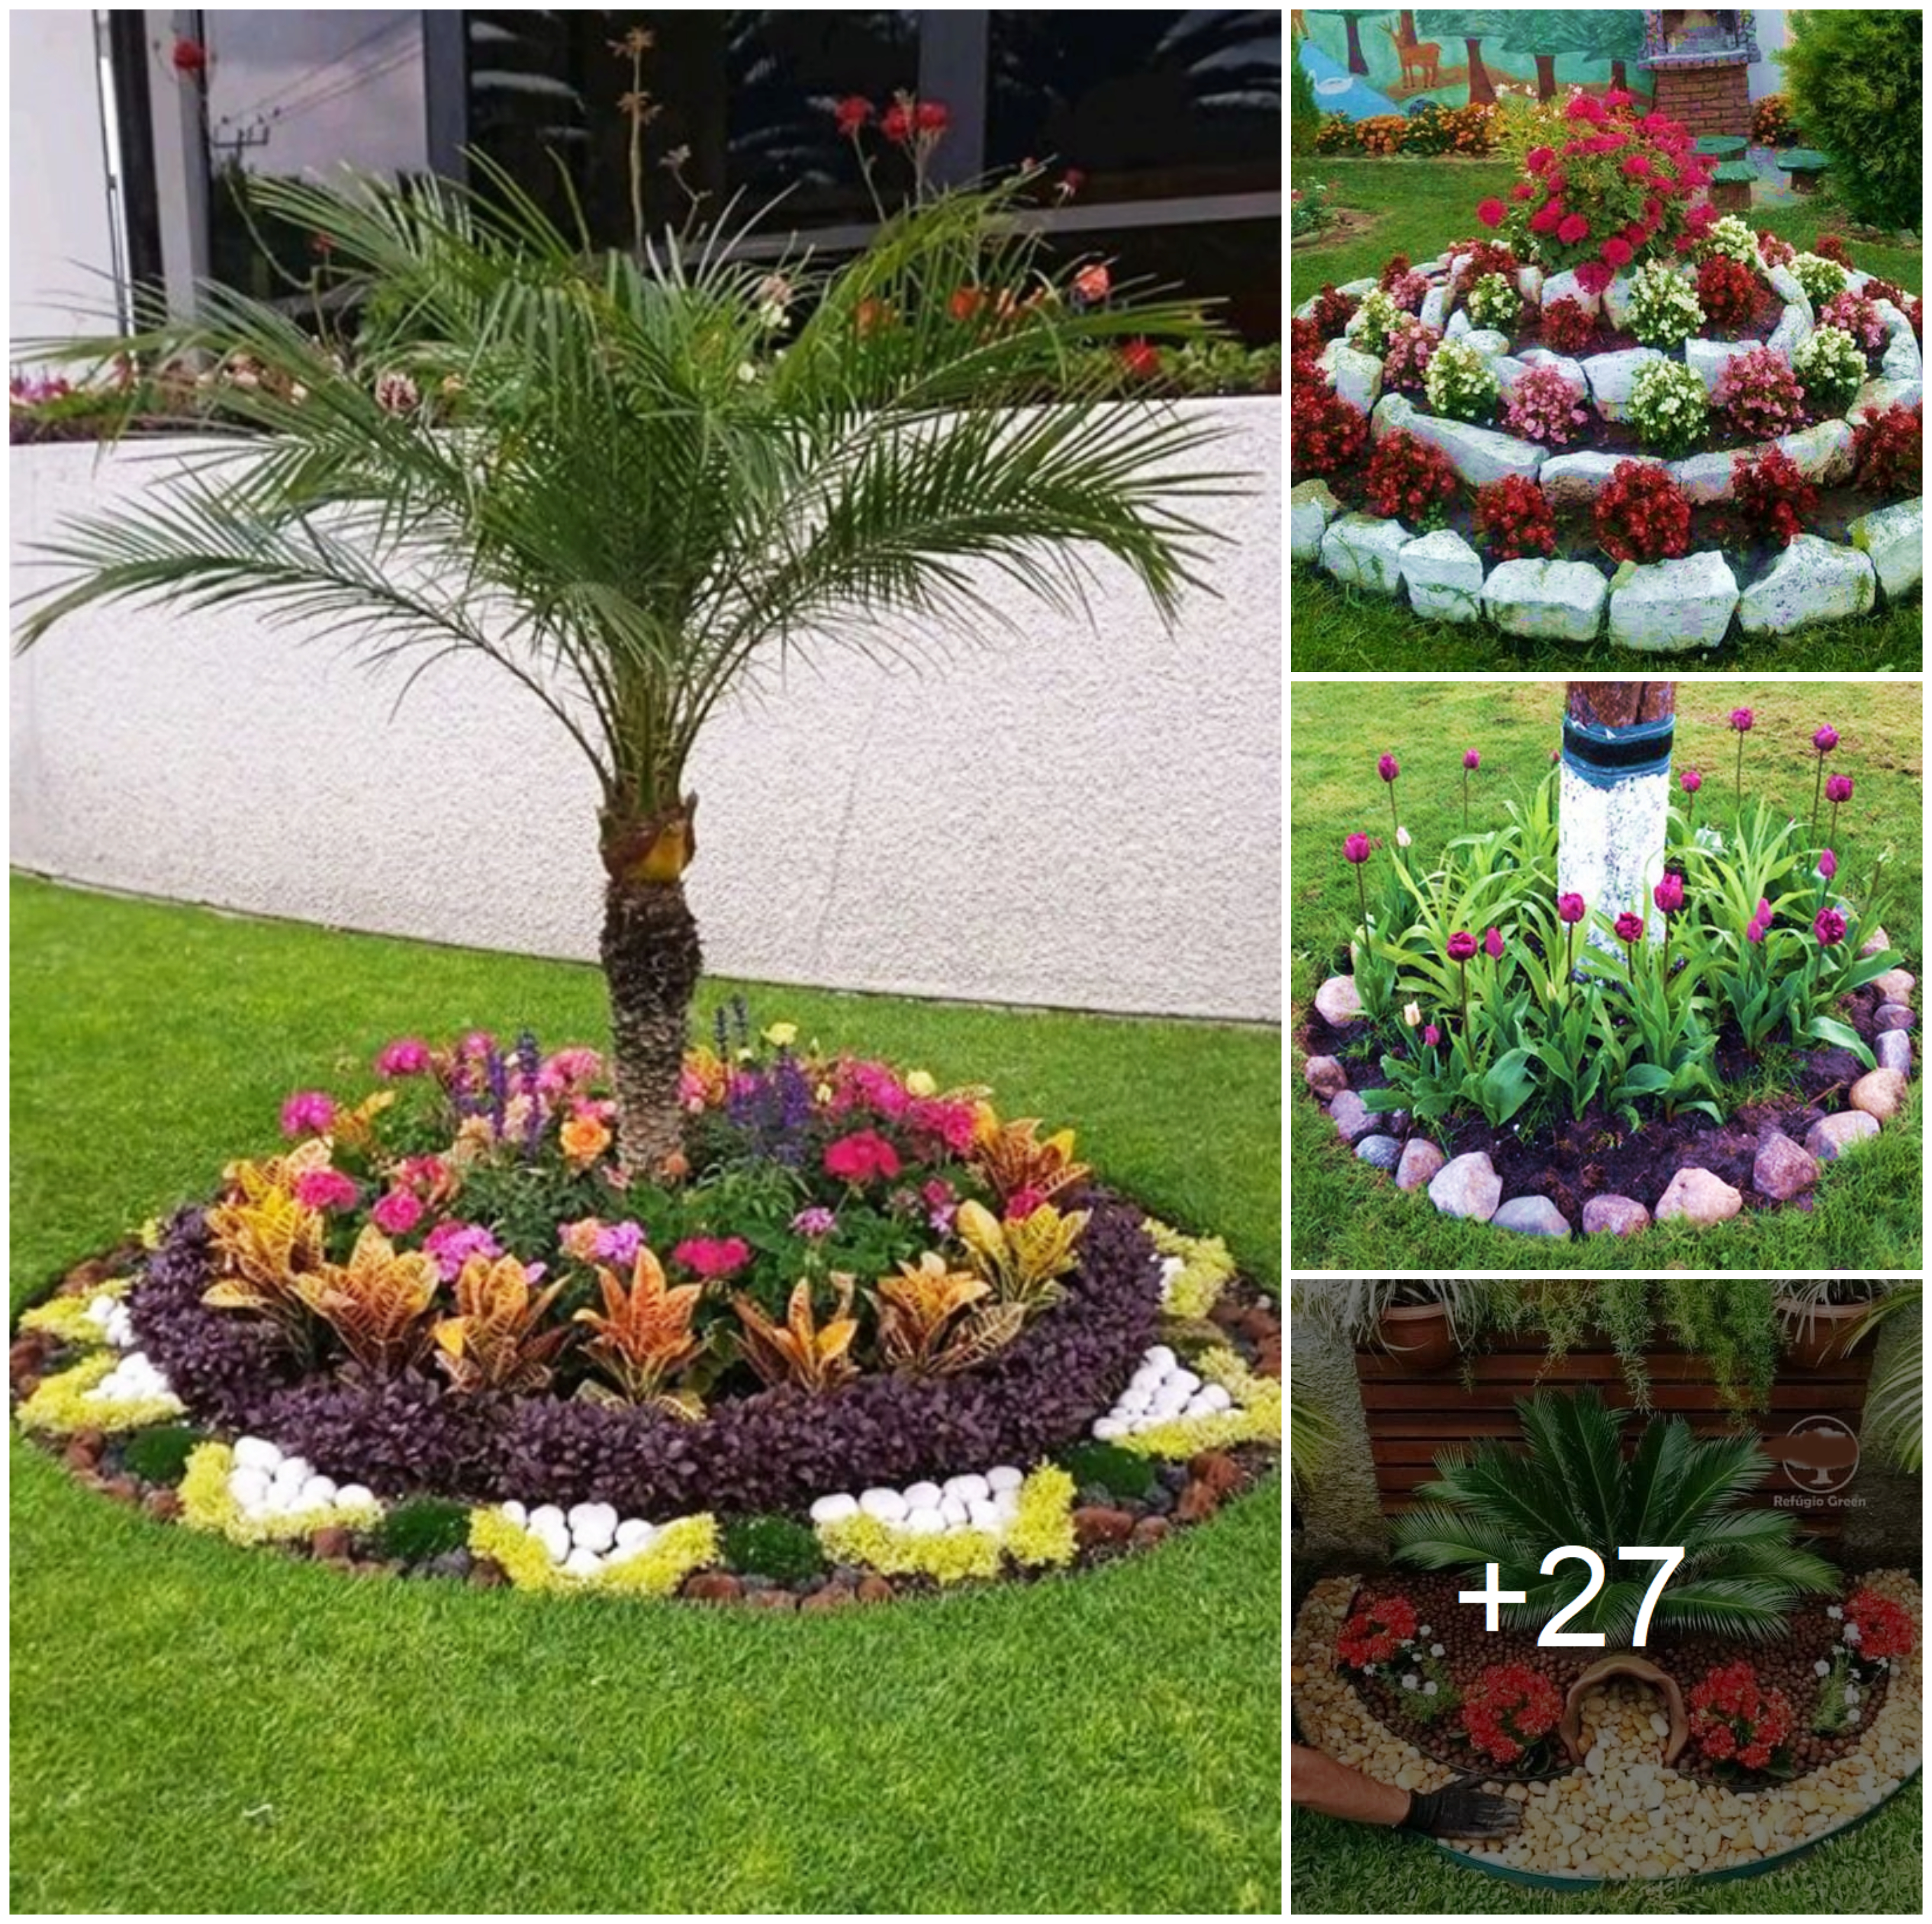 Charming garden island ideas and garden decorations for this spring